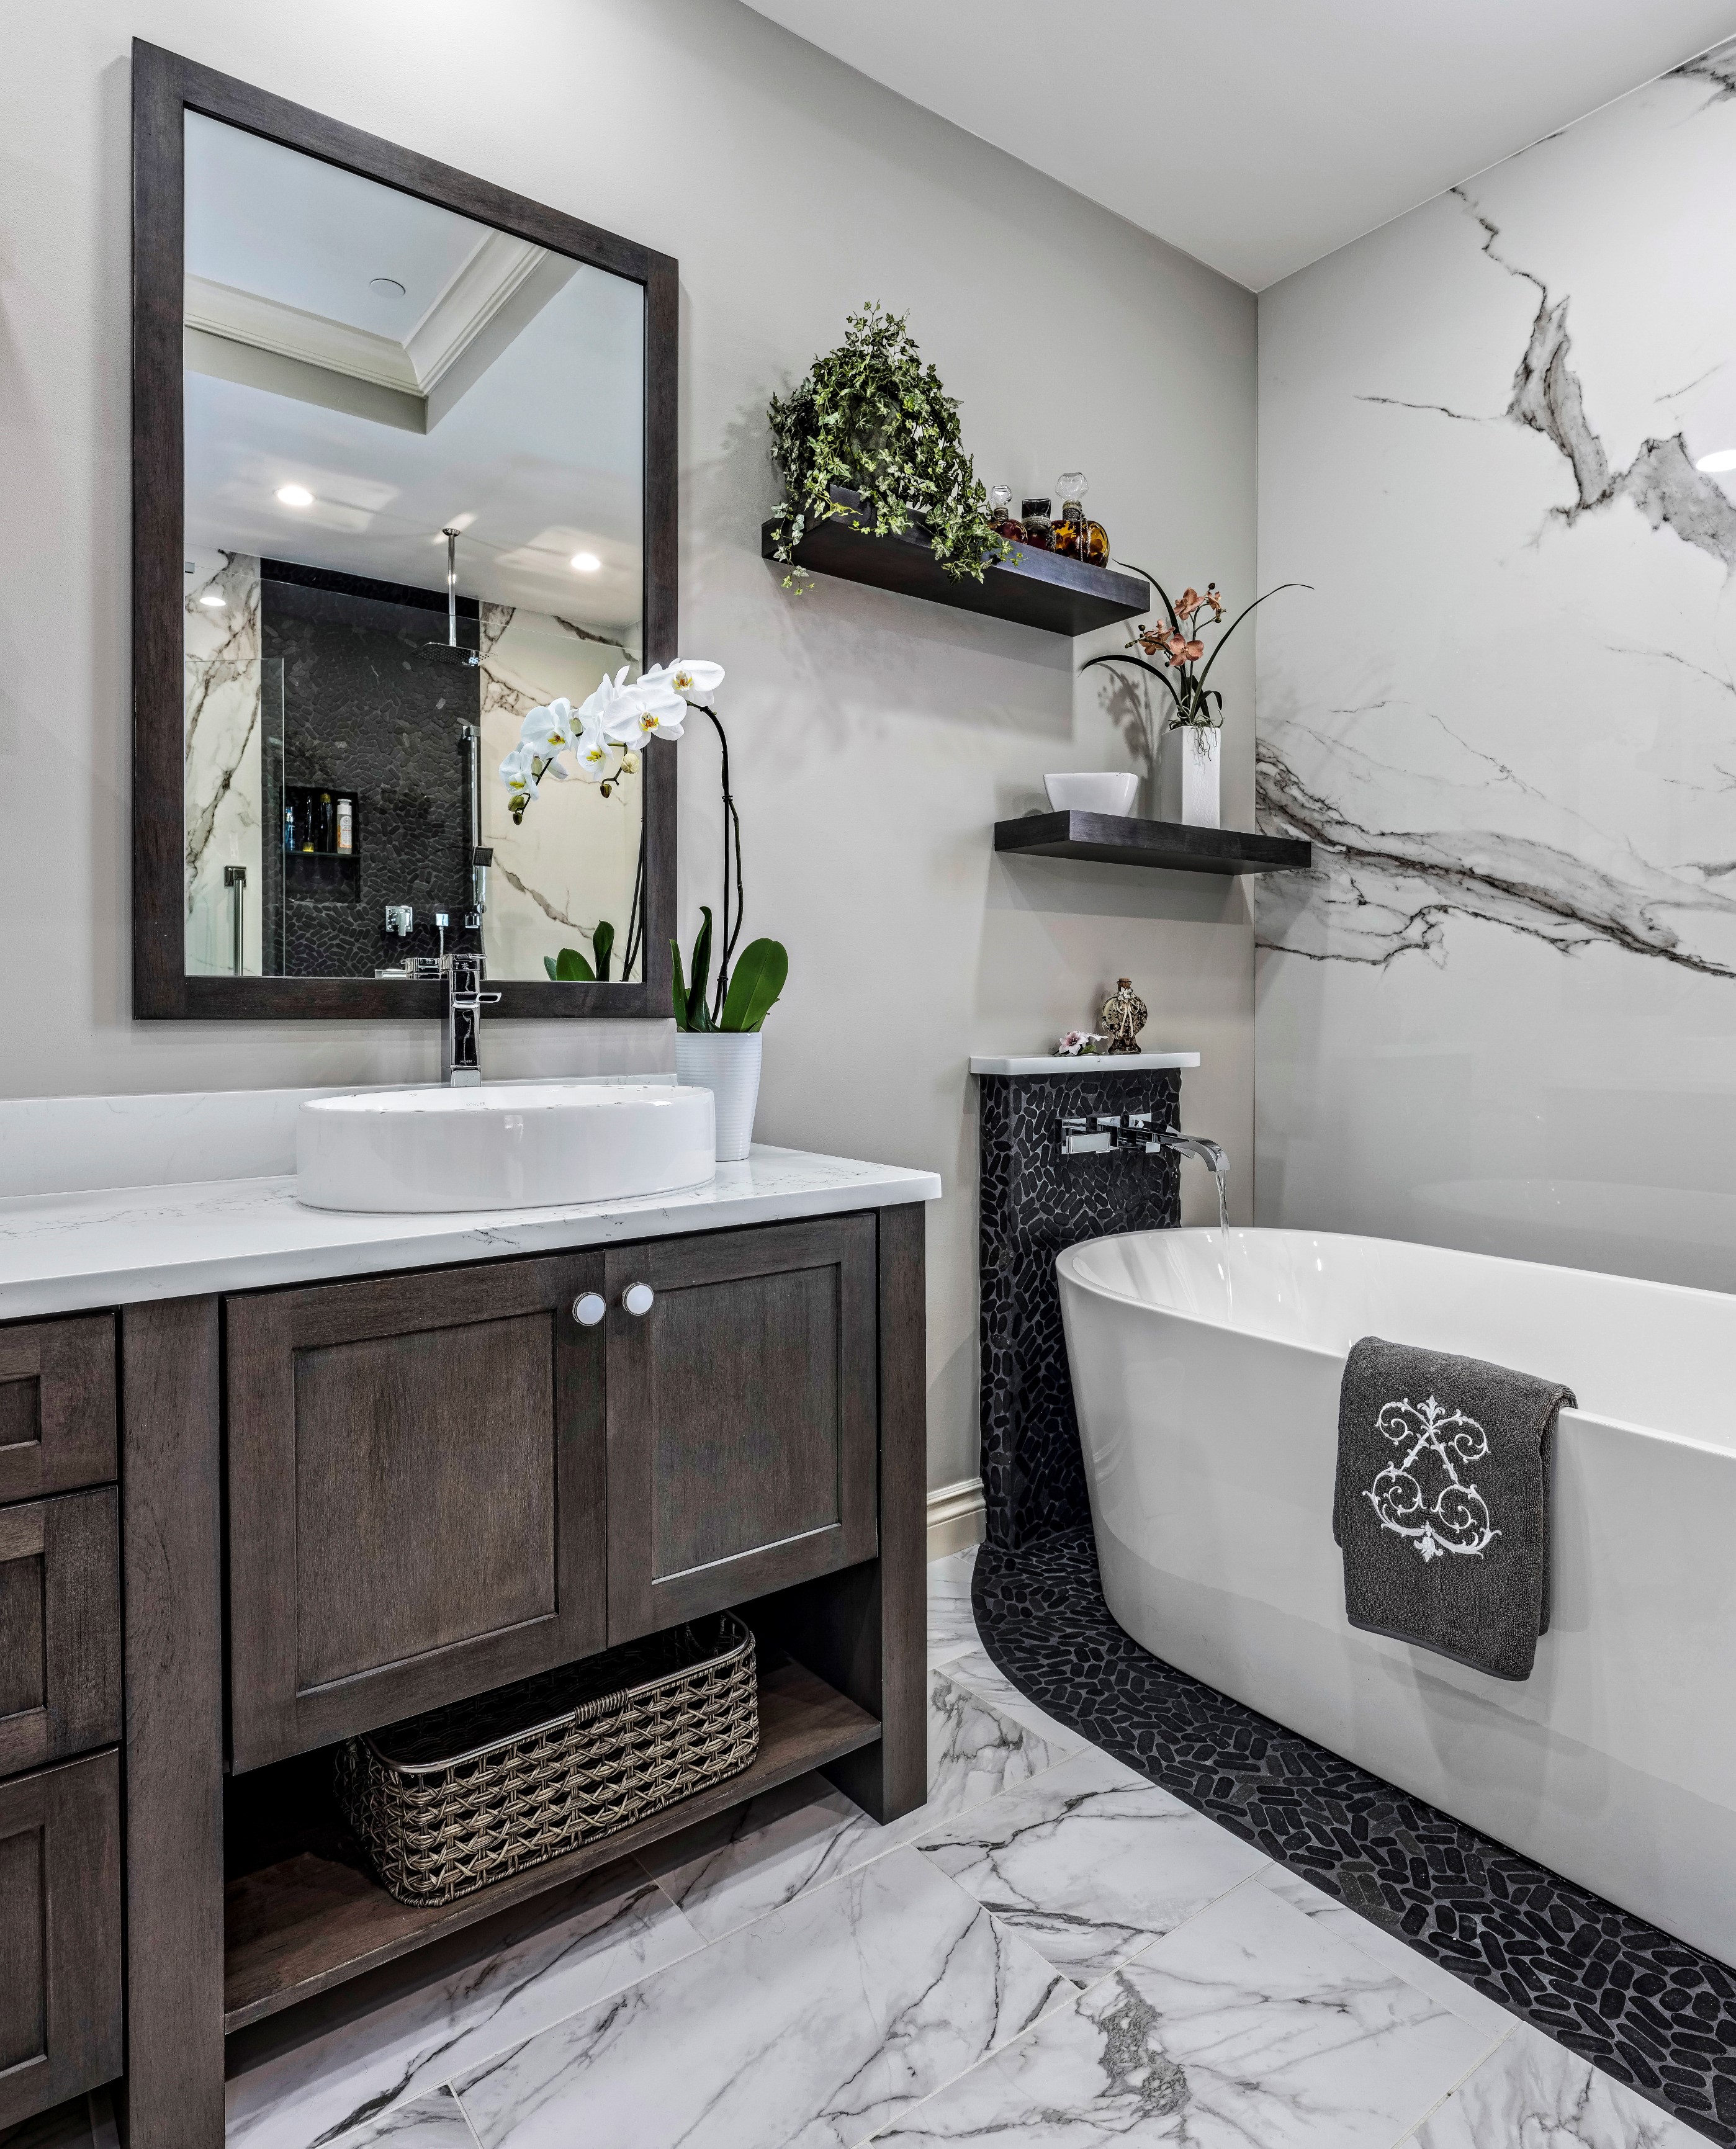 Bathroom Remodeling Typically Cost, How Much Does It Cost To Remodel Small Bathroom